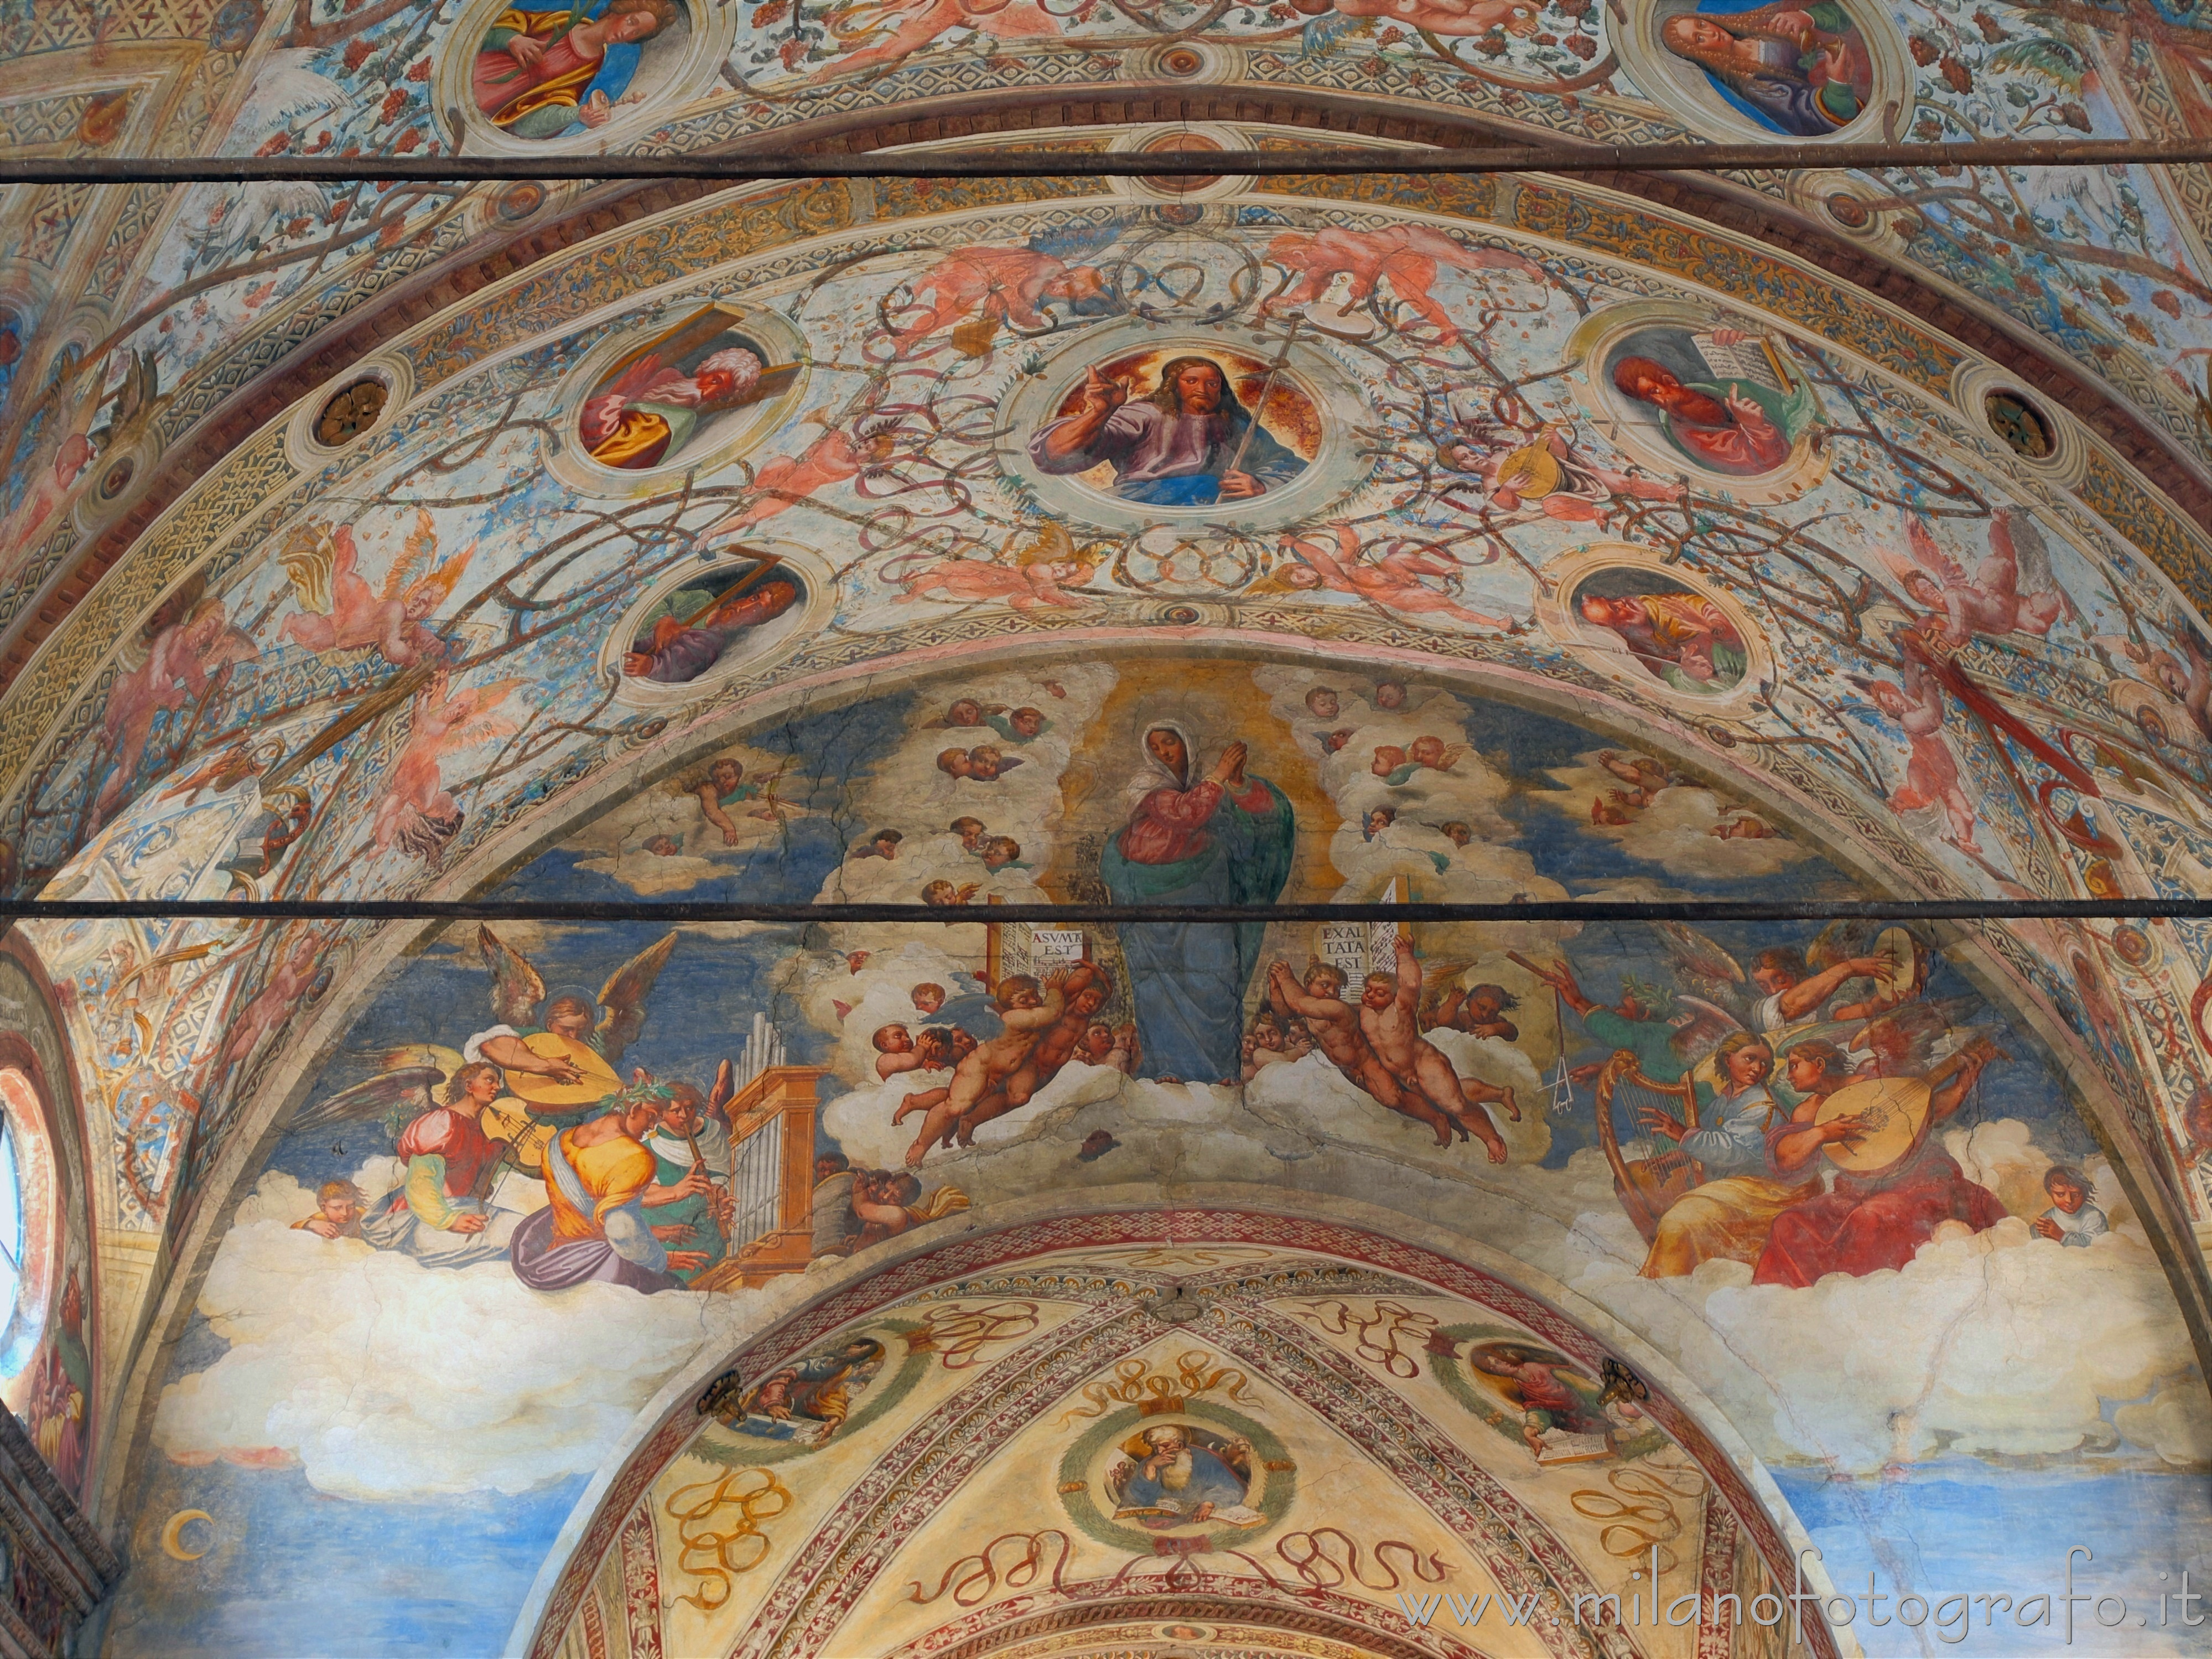 Soncino (Cremona, Italy): Upper part of the great arch in the Church of Santa Maria delle Grazie - Soncino (Cremona, Italy)